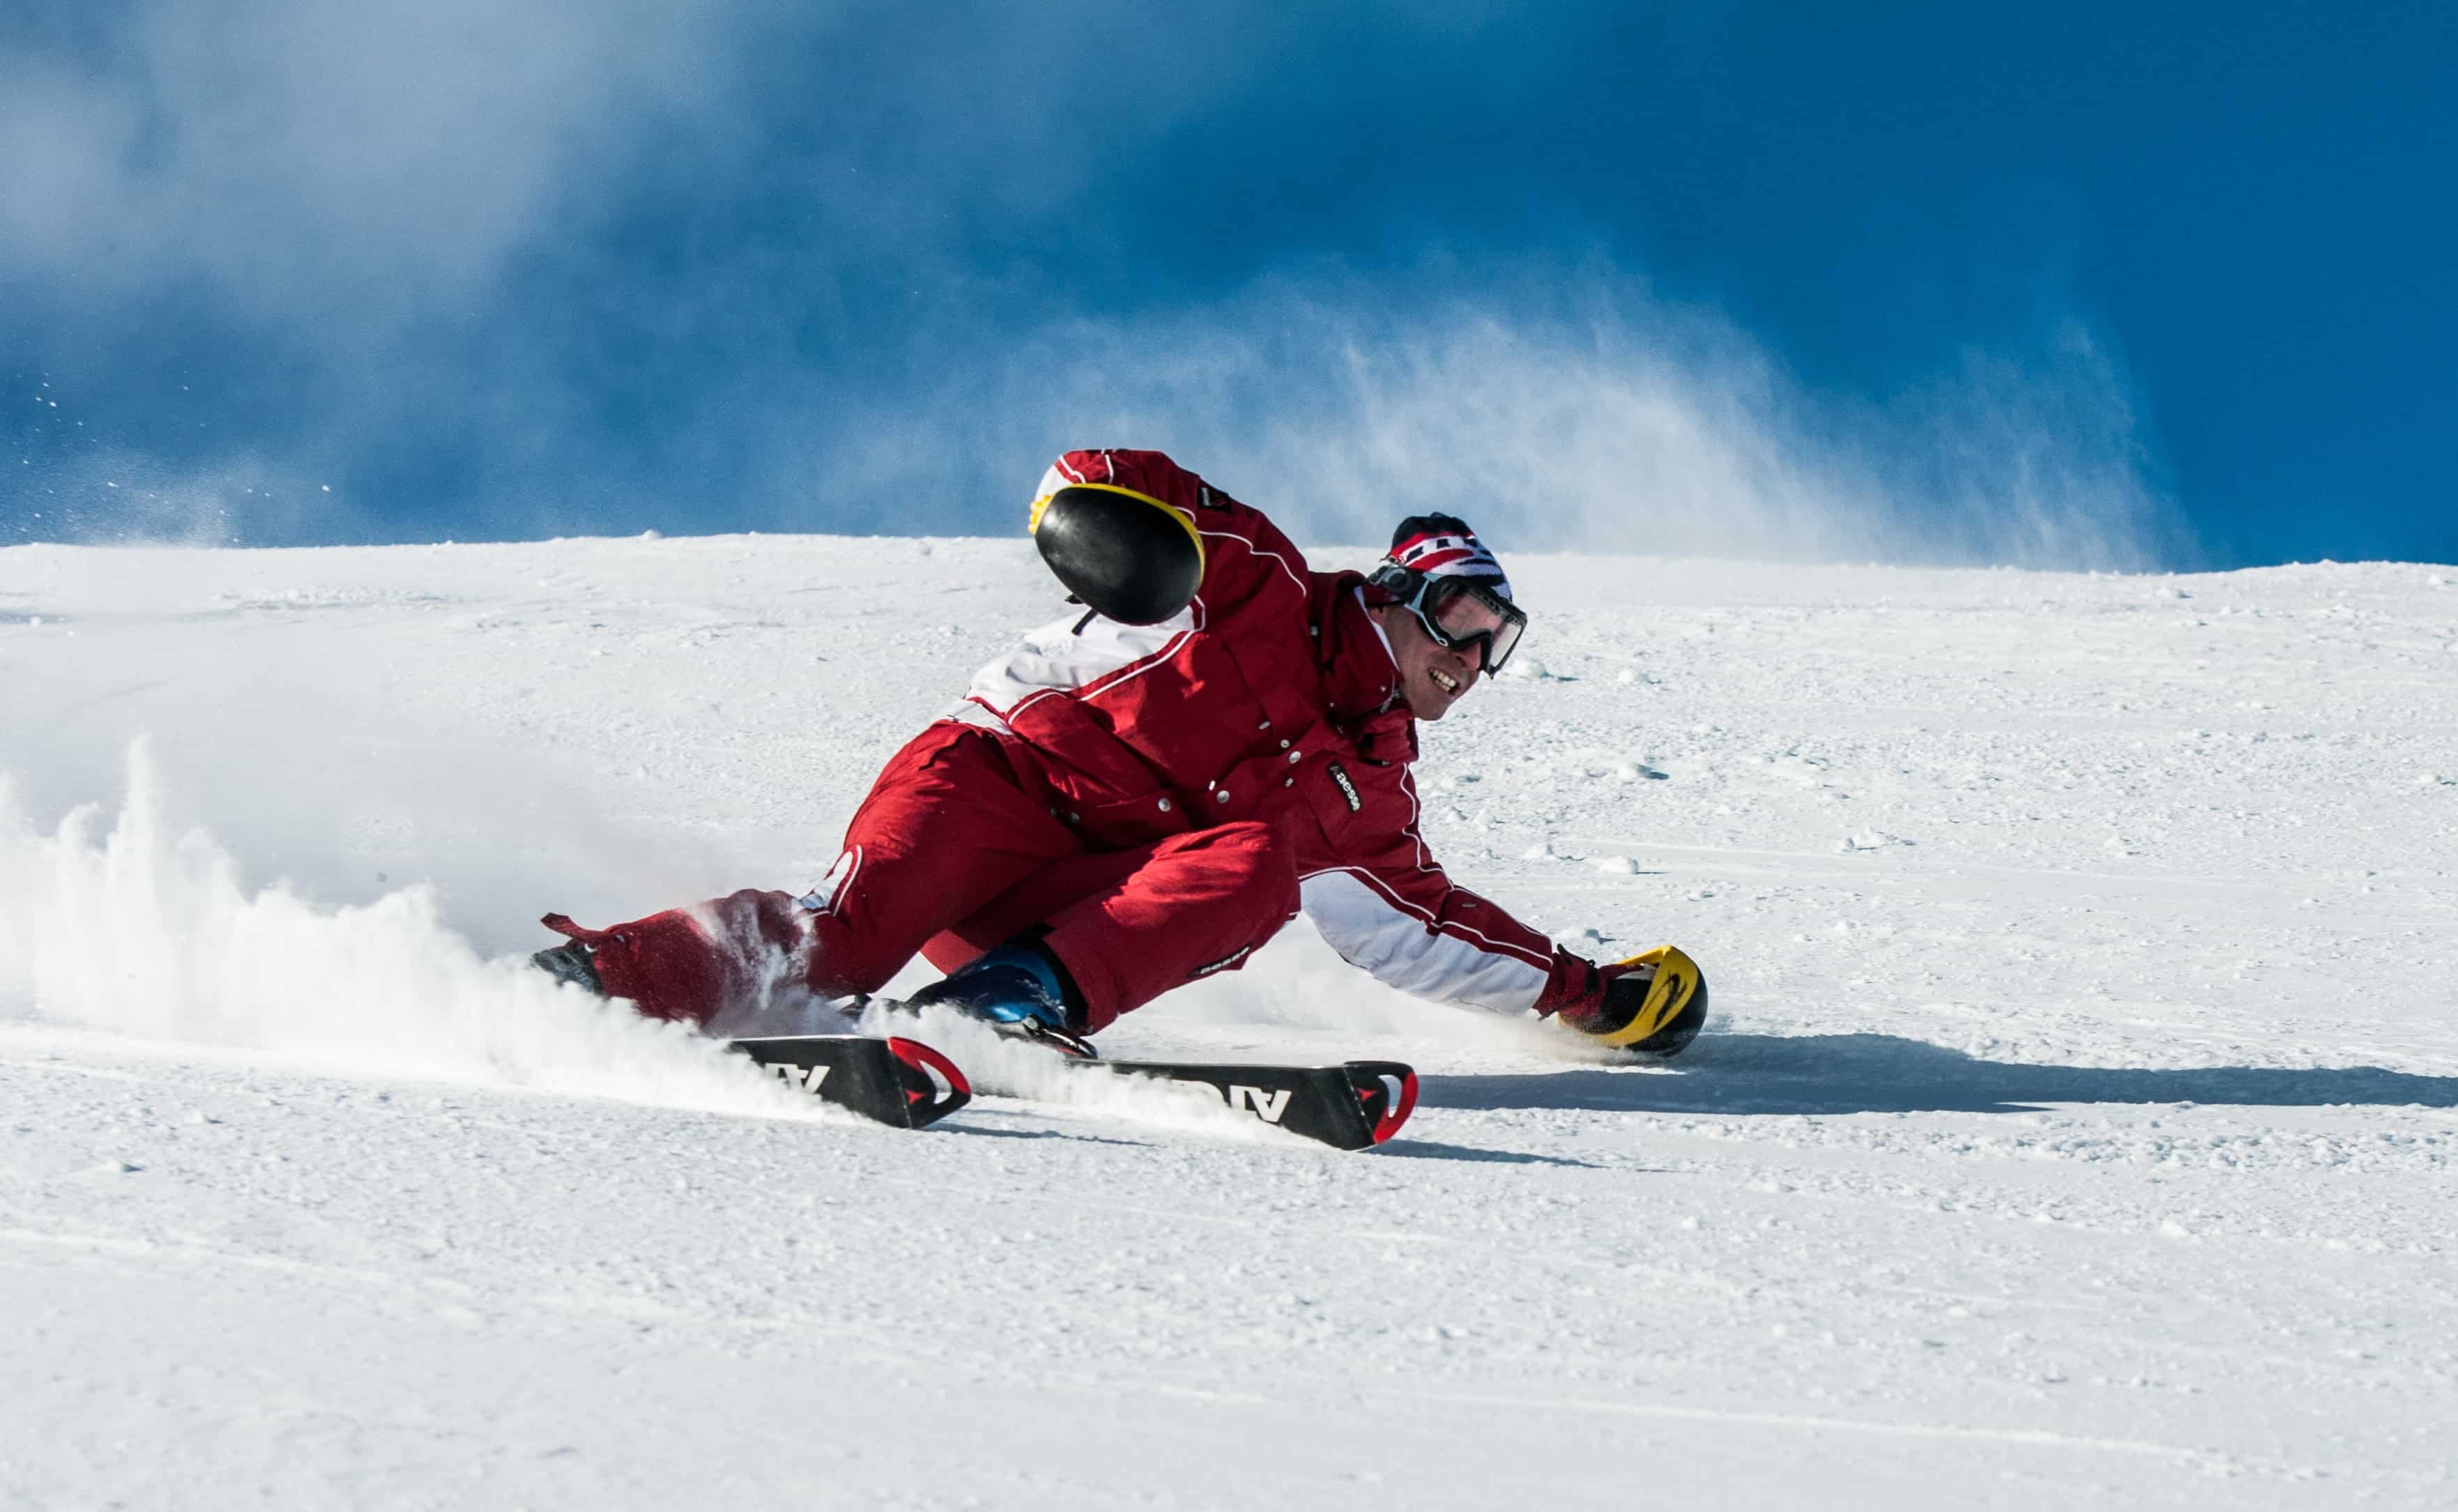 Man in red skiing down a slope